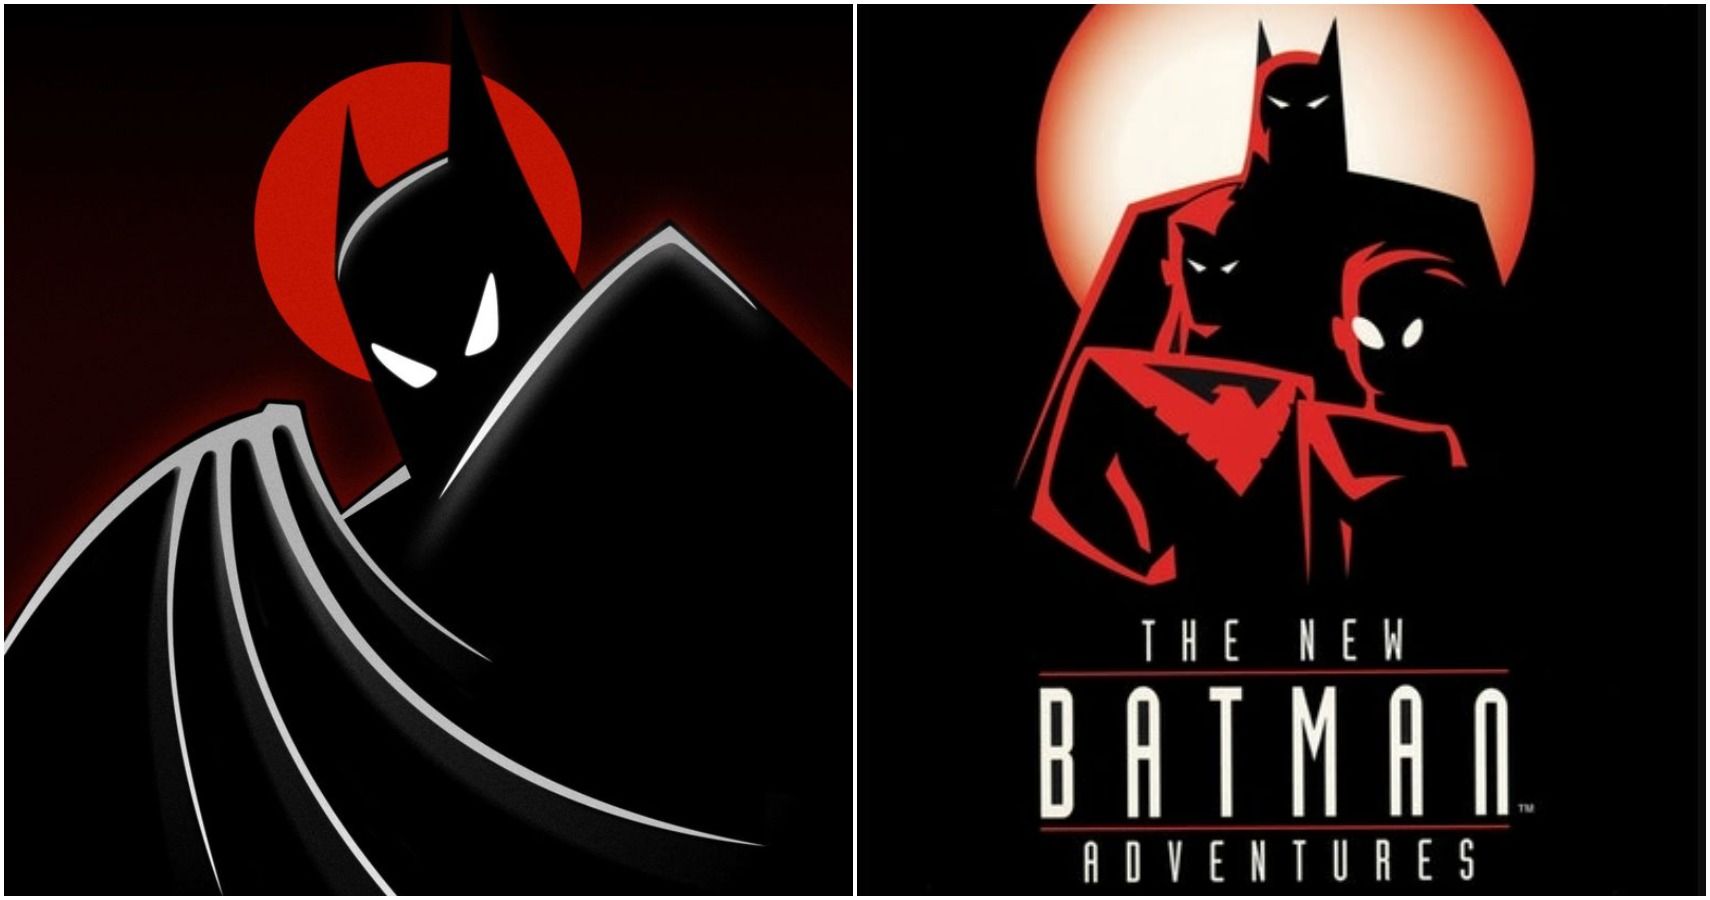 10 Ways The New Batman Adventures Changed From Batman: The Animated Series